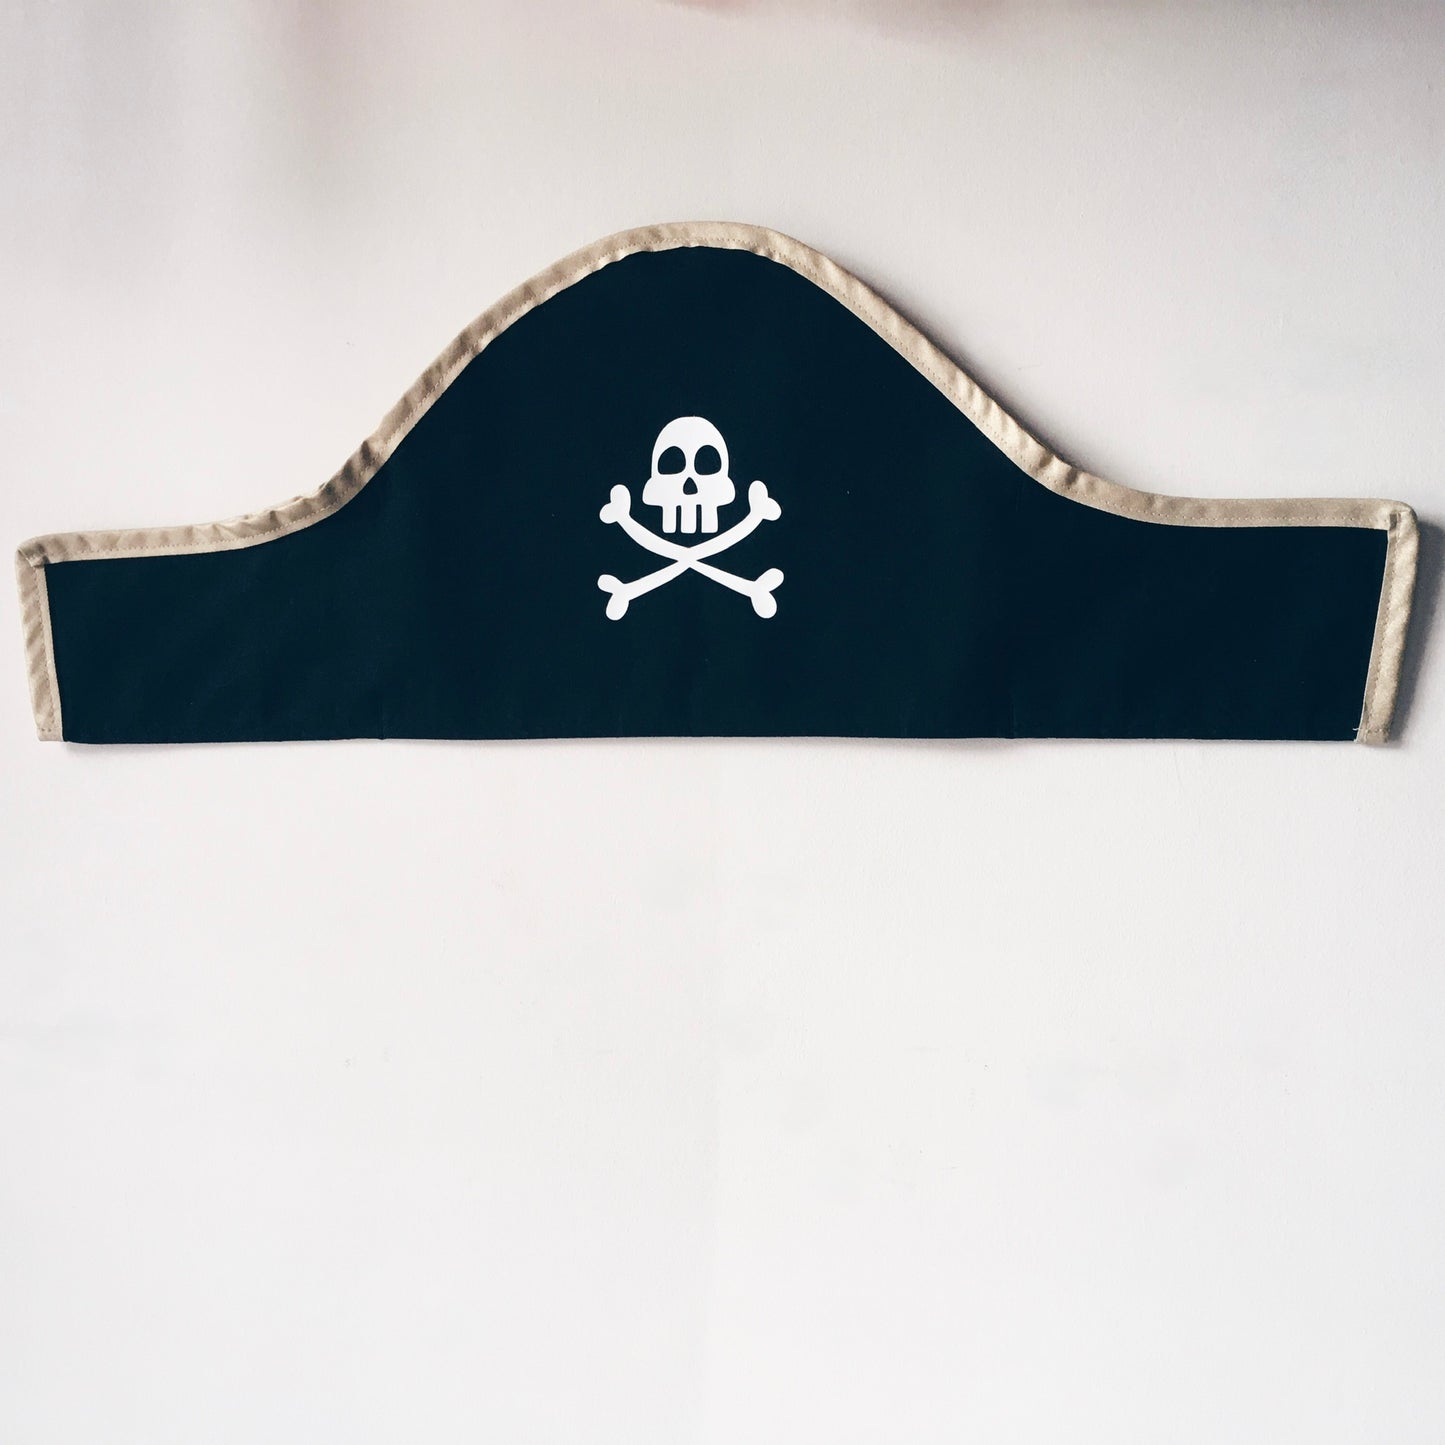 For Just ONE Day - Black pirate hat with gold binding and white skull and crossbones print